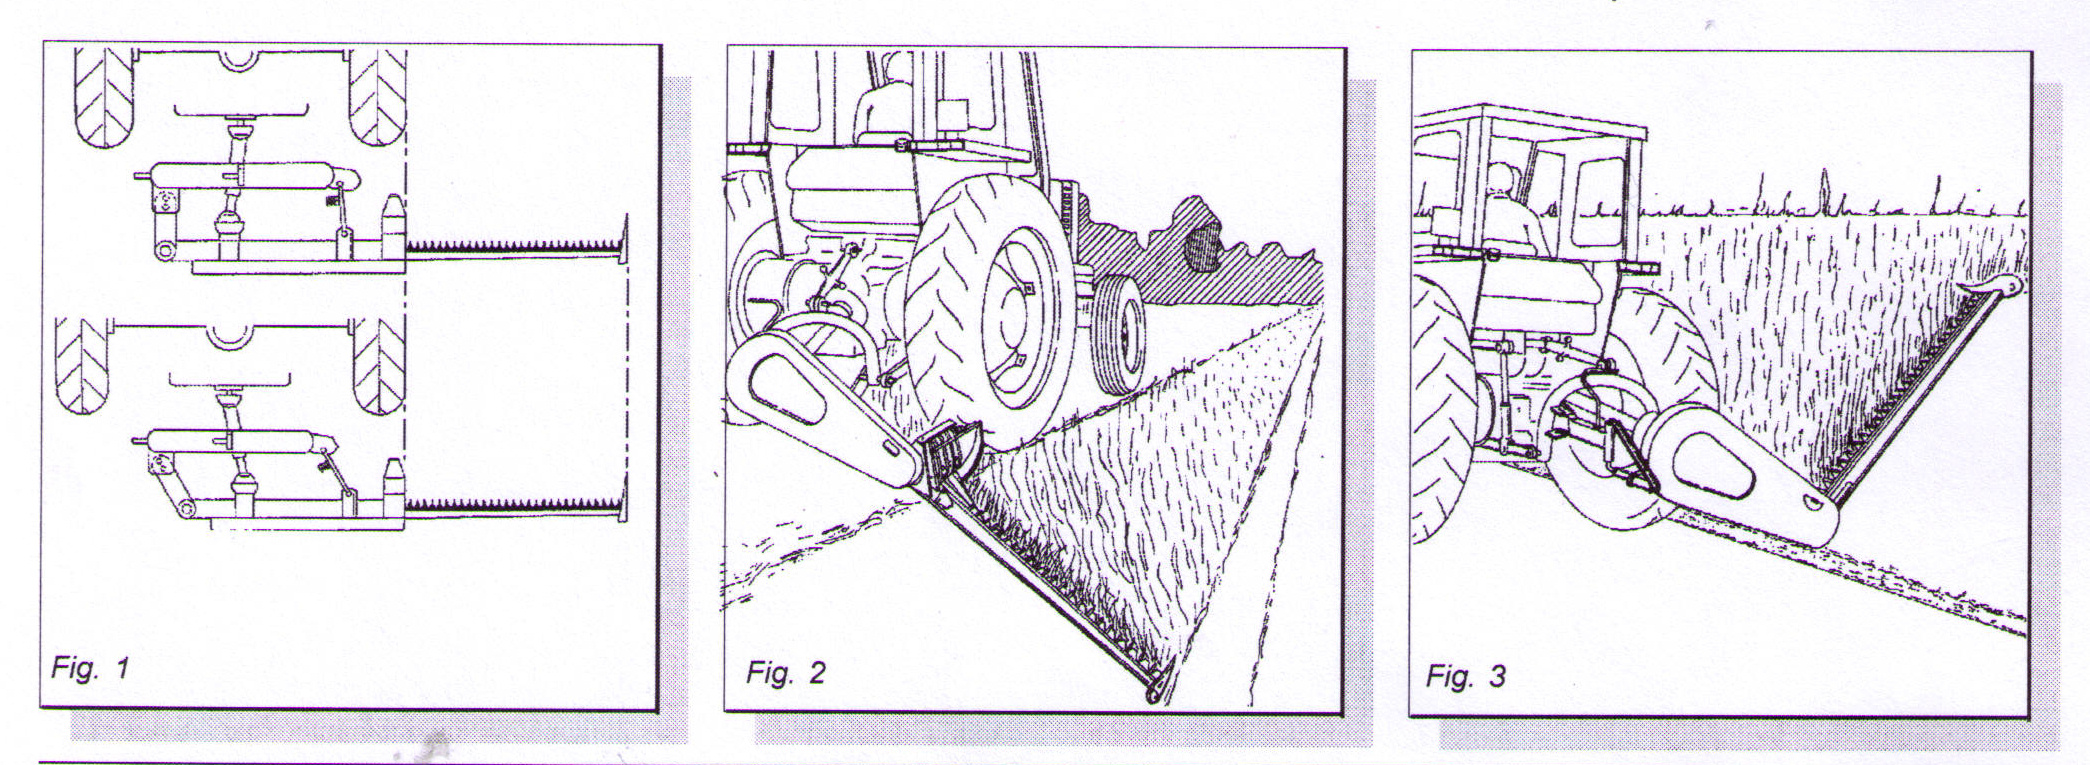 Hitch Postions And Bar Positions - Hitch connection can be shifted to right, sickle bar can be angled to mow ditch banks and hillsides.